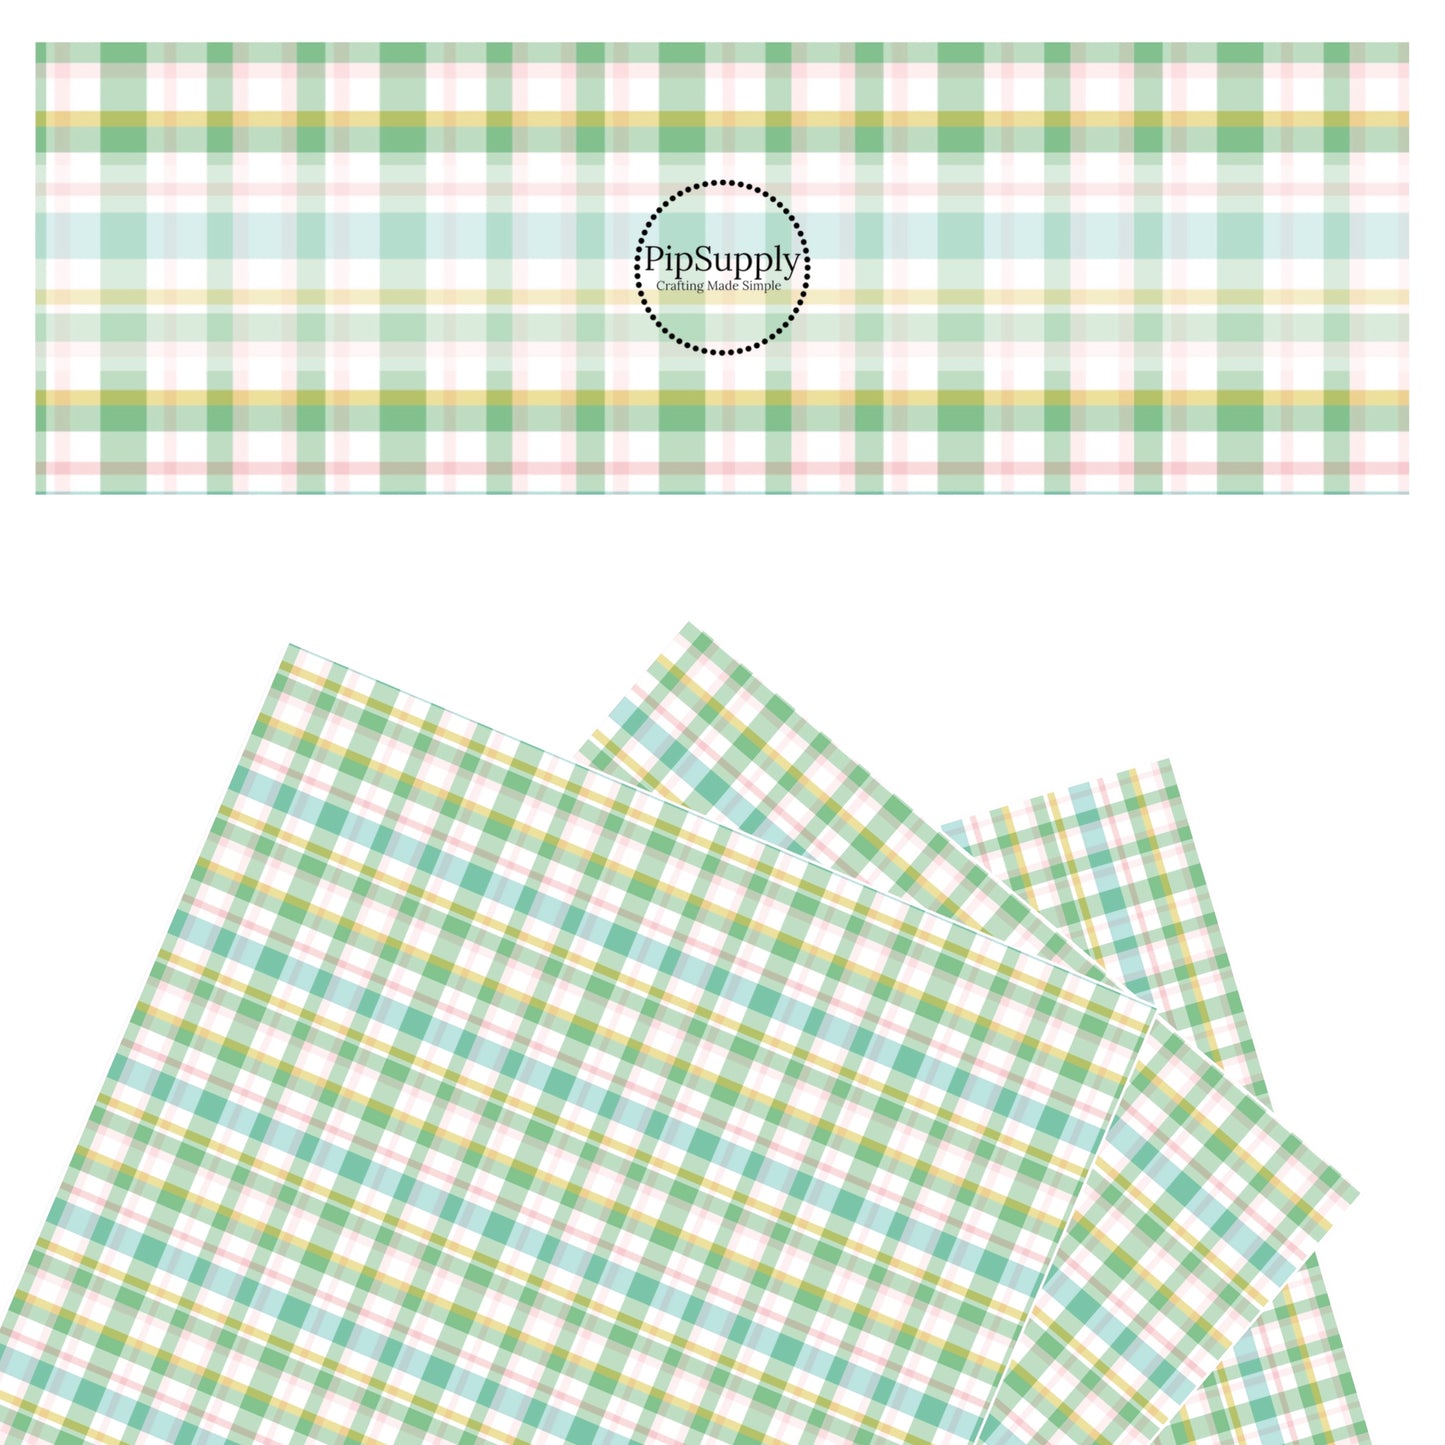 Blue, green, pink, yellow, and white tartan faux leather sheets